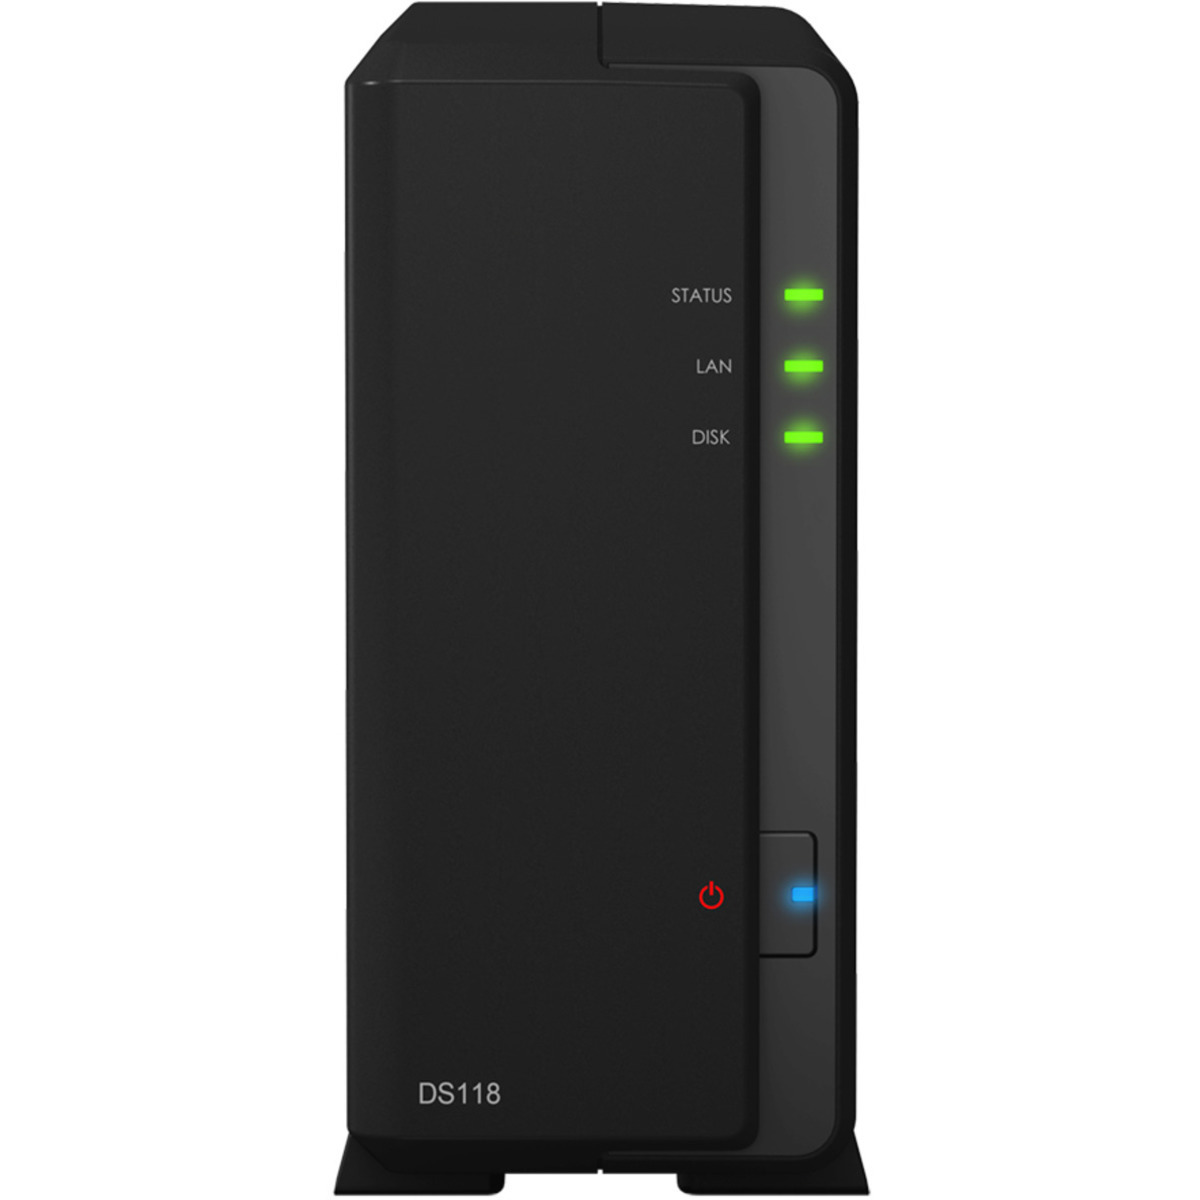 buy $719 Synology DiskStation DS118 4tb Desktop NAS - Network Attached Storage Device 1x4000gb Samsung 870 QVO MZ-77Q4T0 2.5 SATA 6Gb/s SSD CONSUMER Class Drives Installed - Burn-In Tested - nas headquarters buy network attached storage server device das new raid-5 free shipping usa christmas new year holiday sale DiskStation DS118